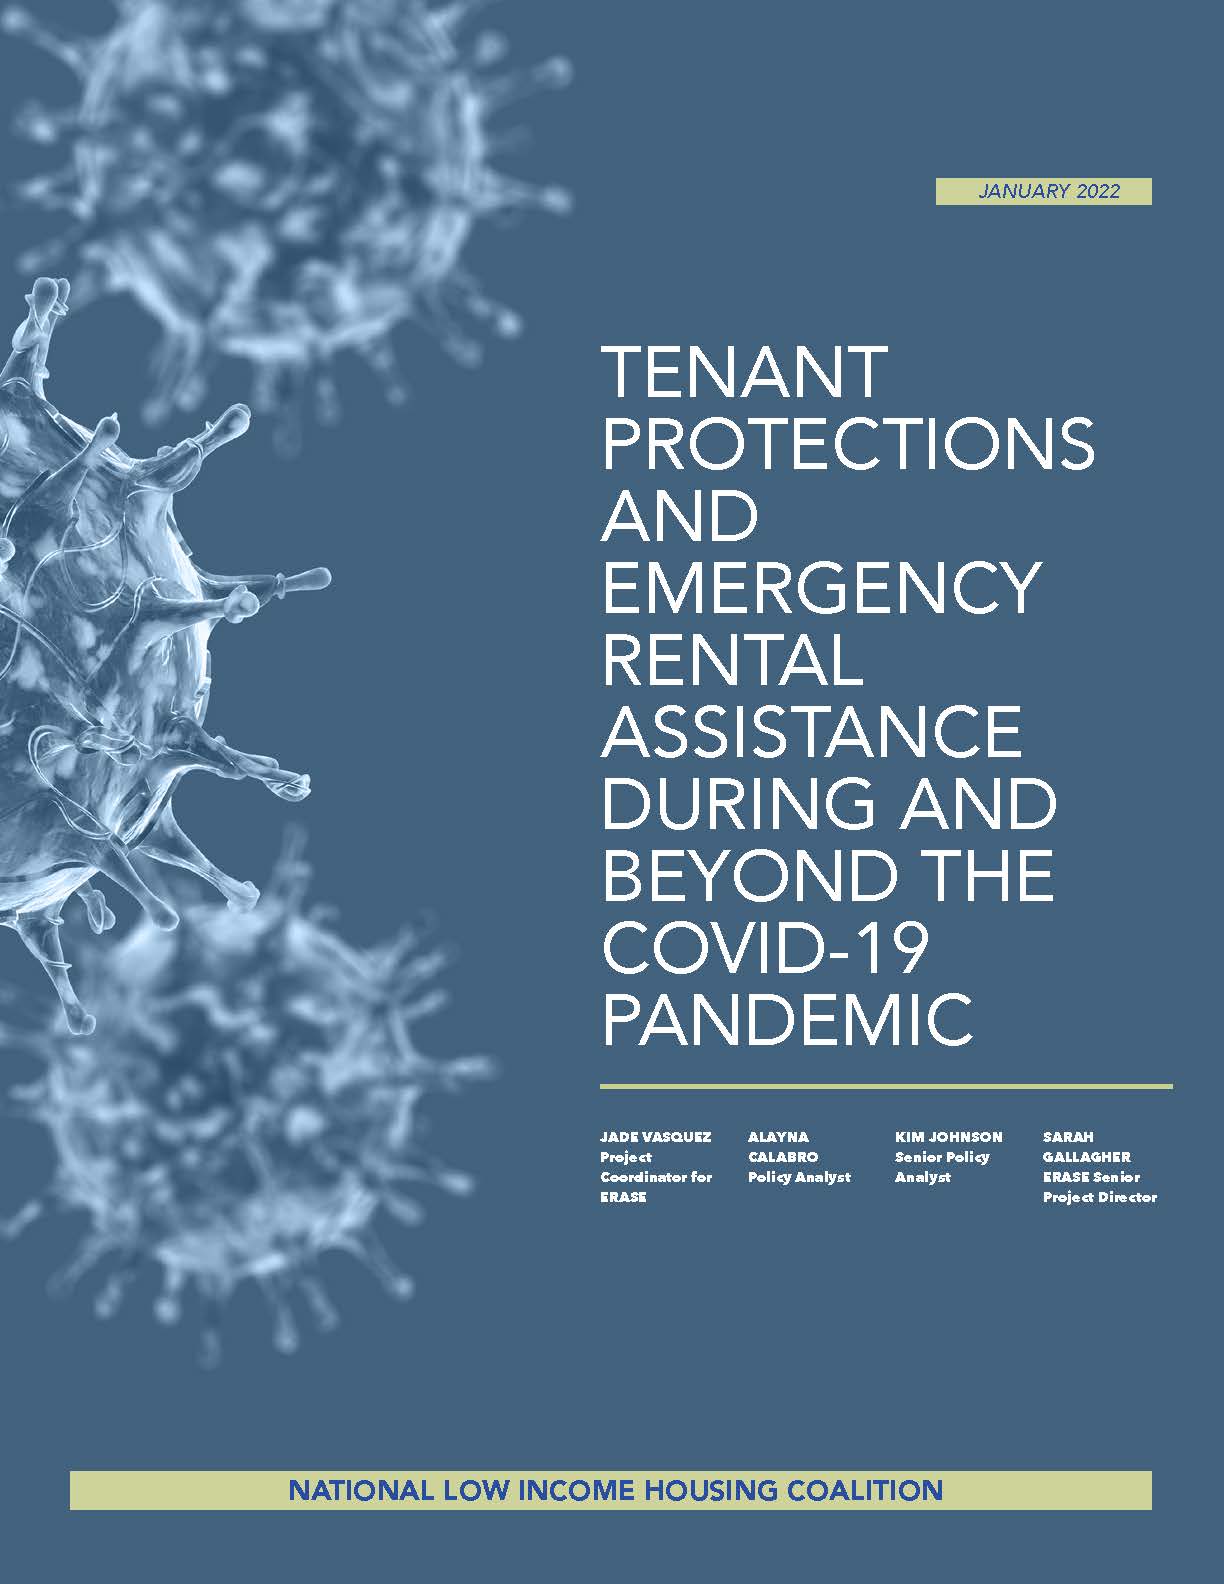 Tenant Protections and Emergency Rental Assistance during and beyond the COVID-19 Pandemic